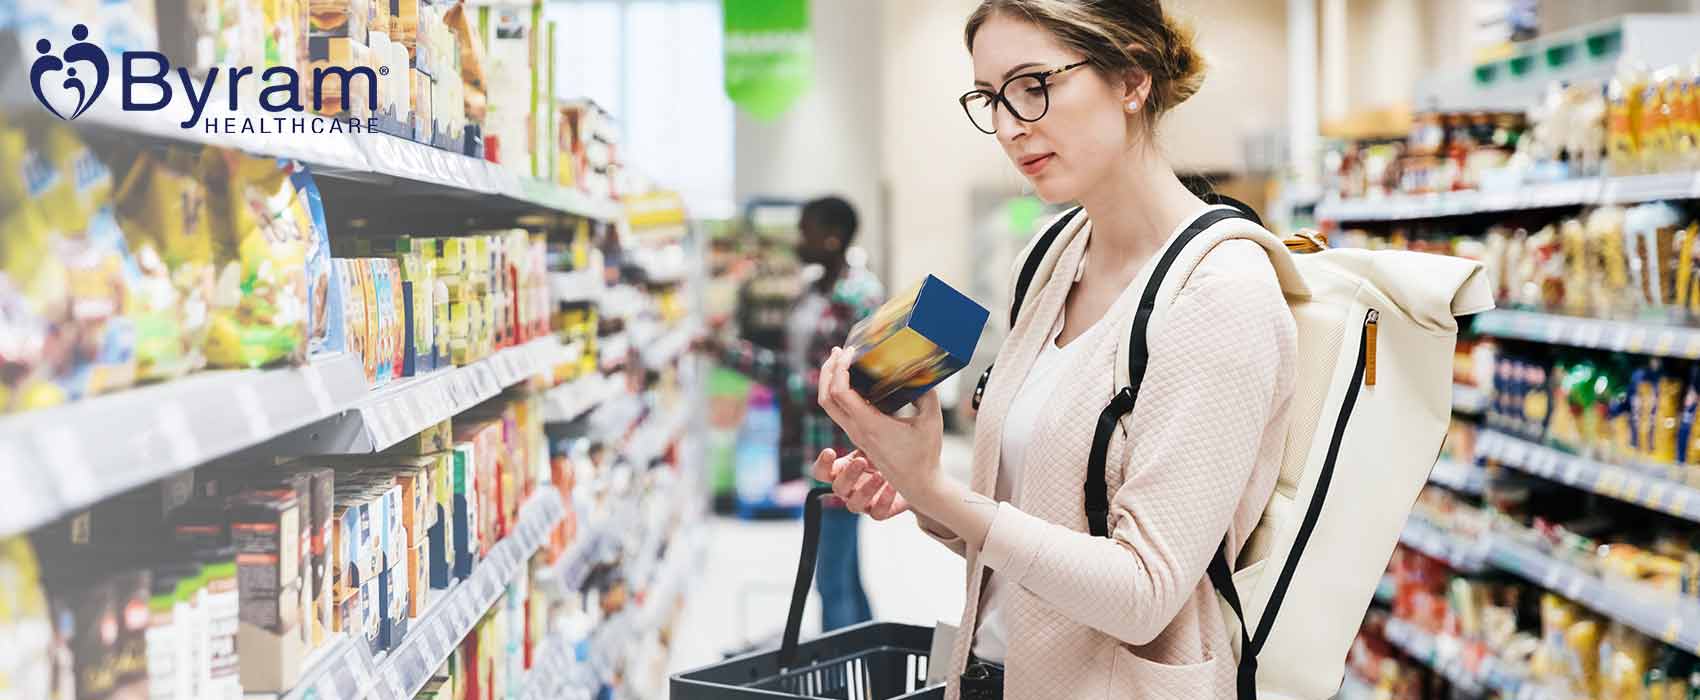 Woman looking at a can of food in a grocery store.